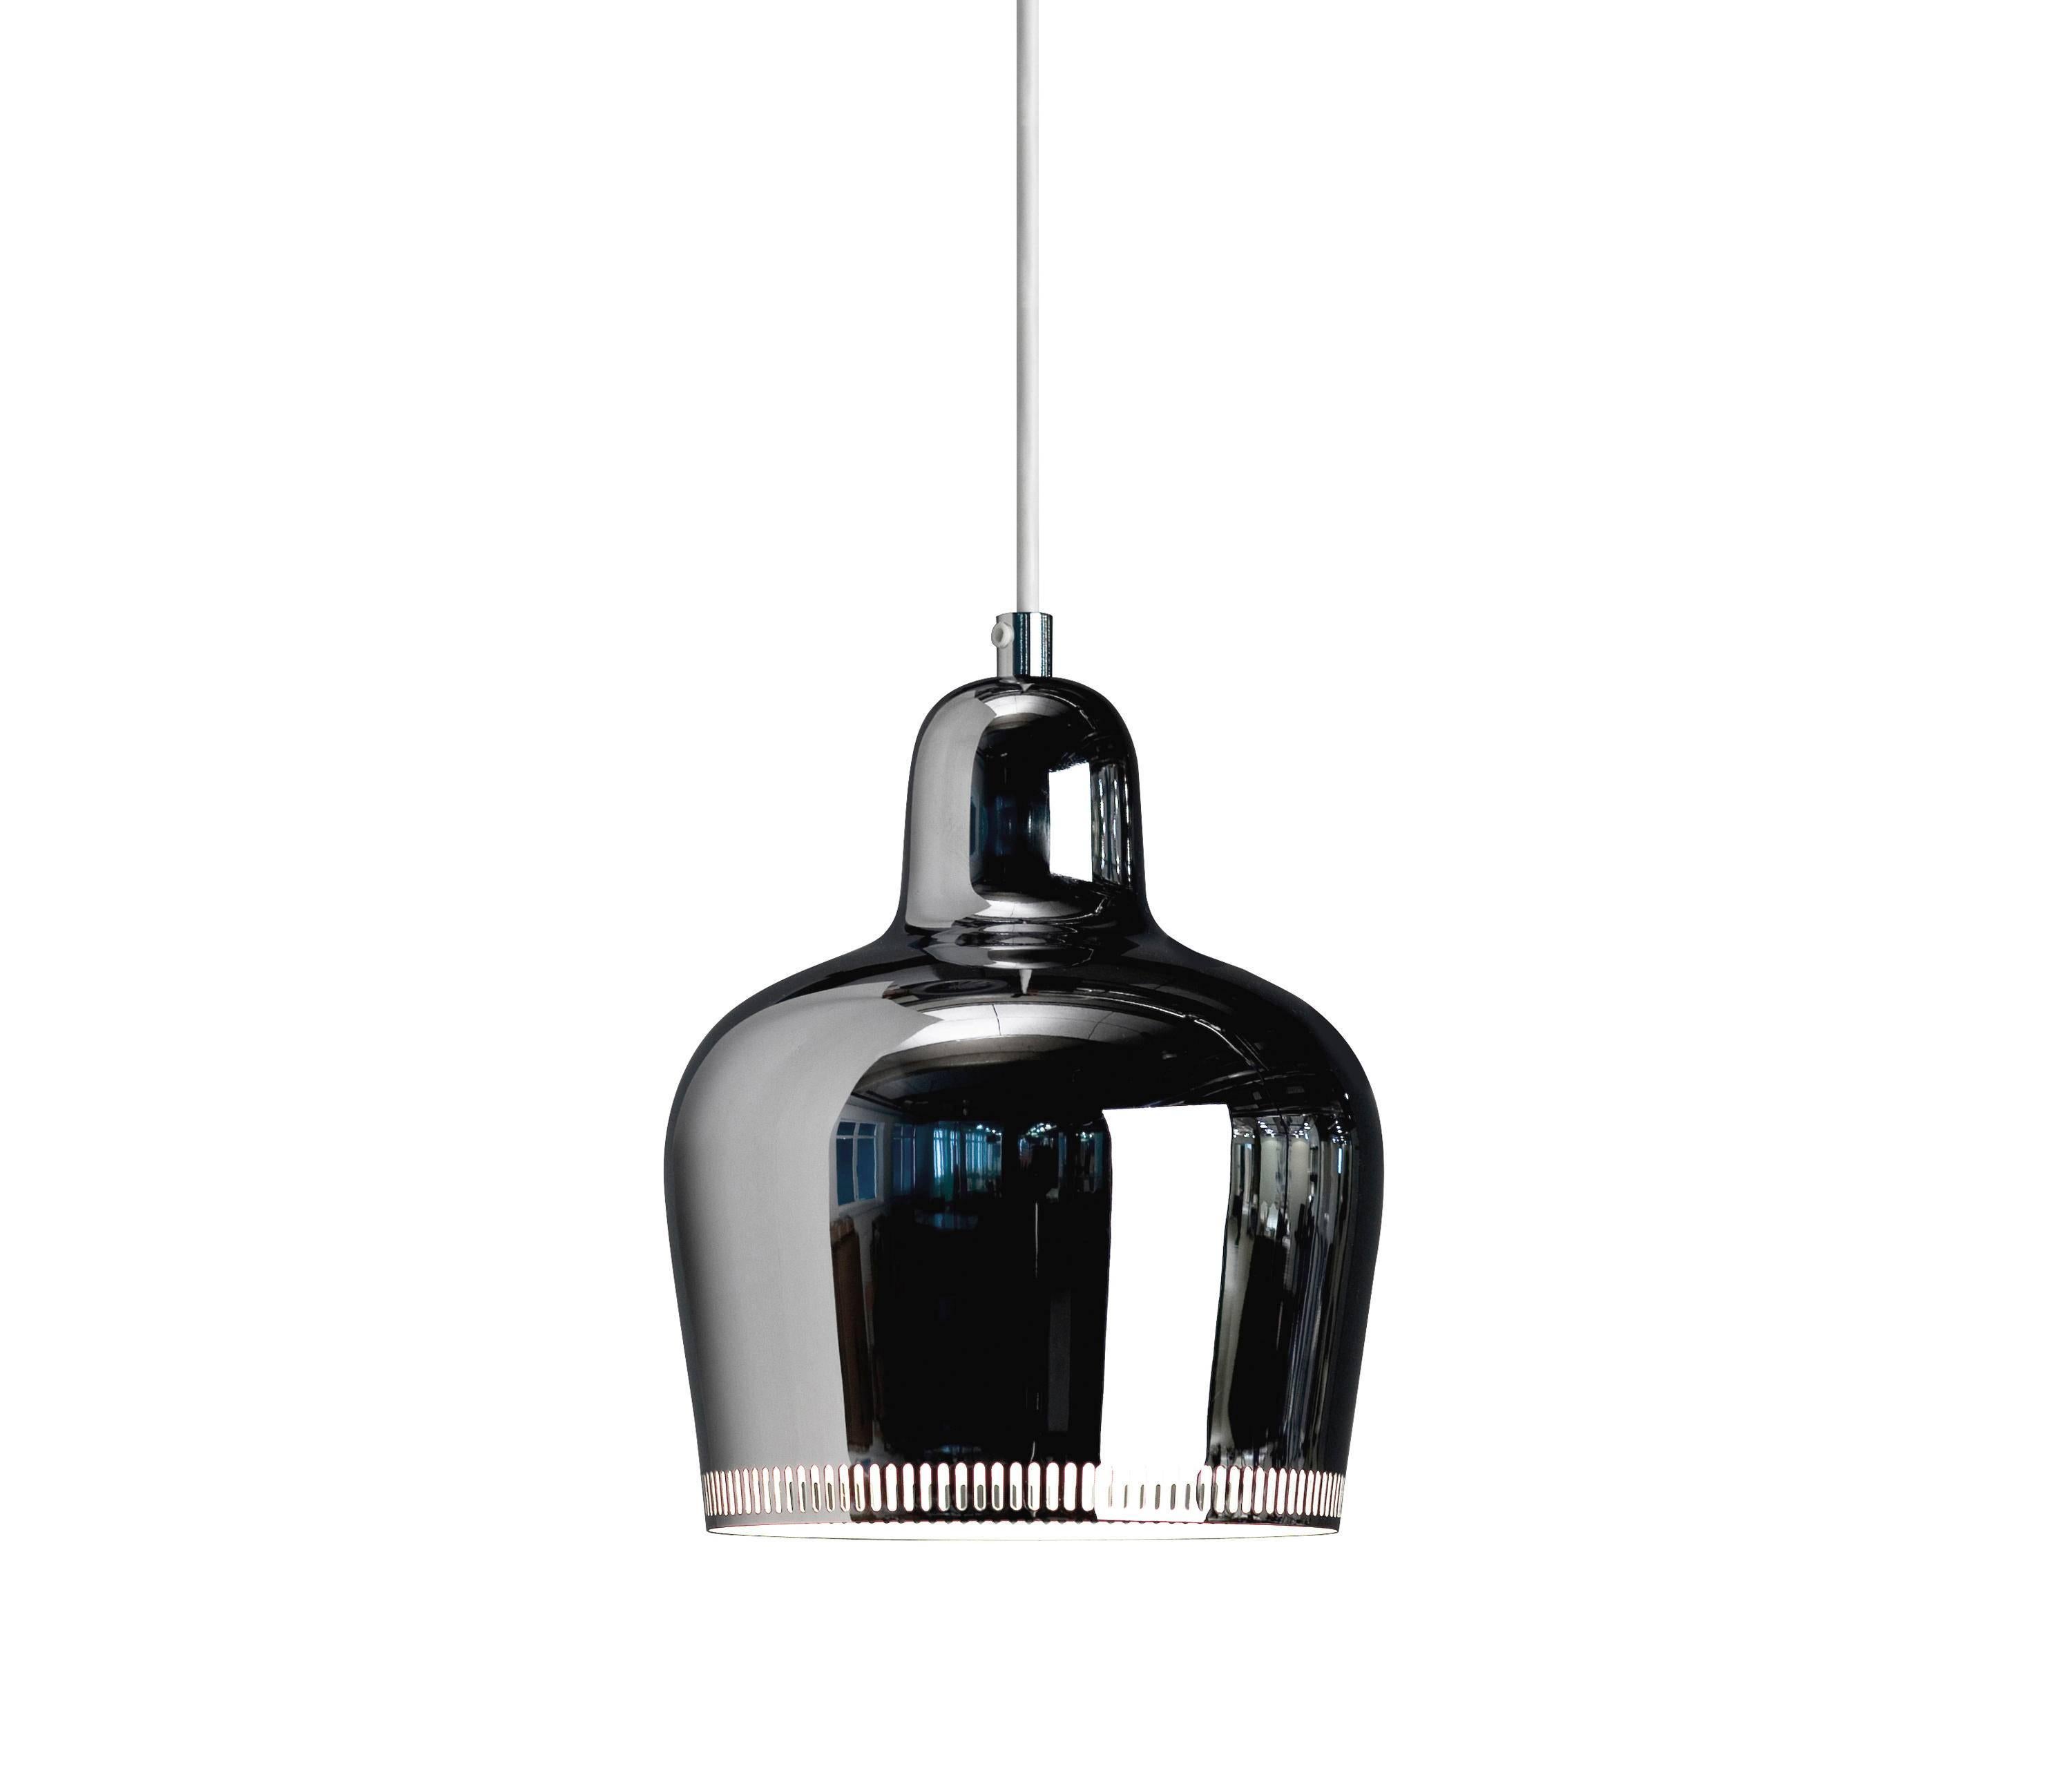 Alvar Aalto A330S 'Golden Bell' chrome pendant light for Artek. Designed in 1937, this iconic lamp has since remained in near constant production by its original manufacturer, Artek of Finland. Executed in clear lacquered brass with white painted